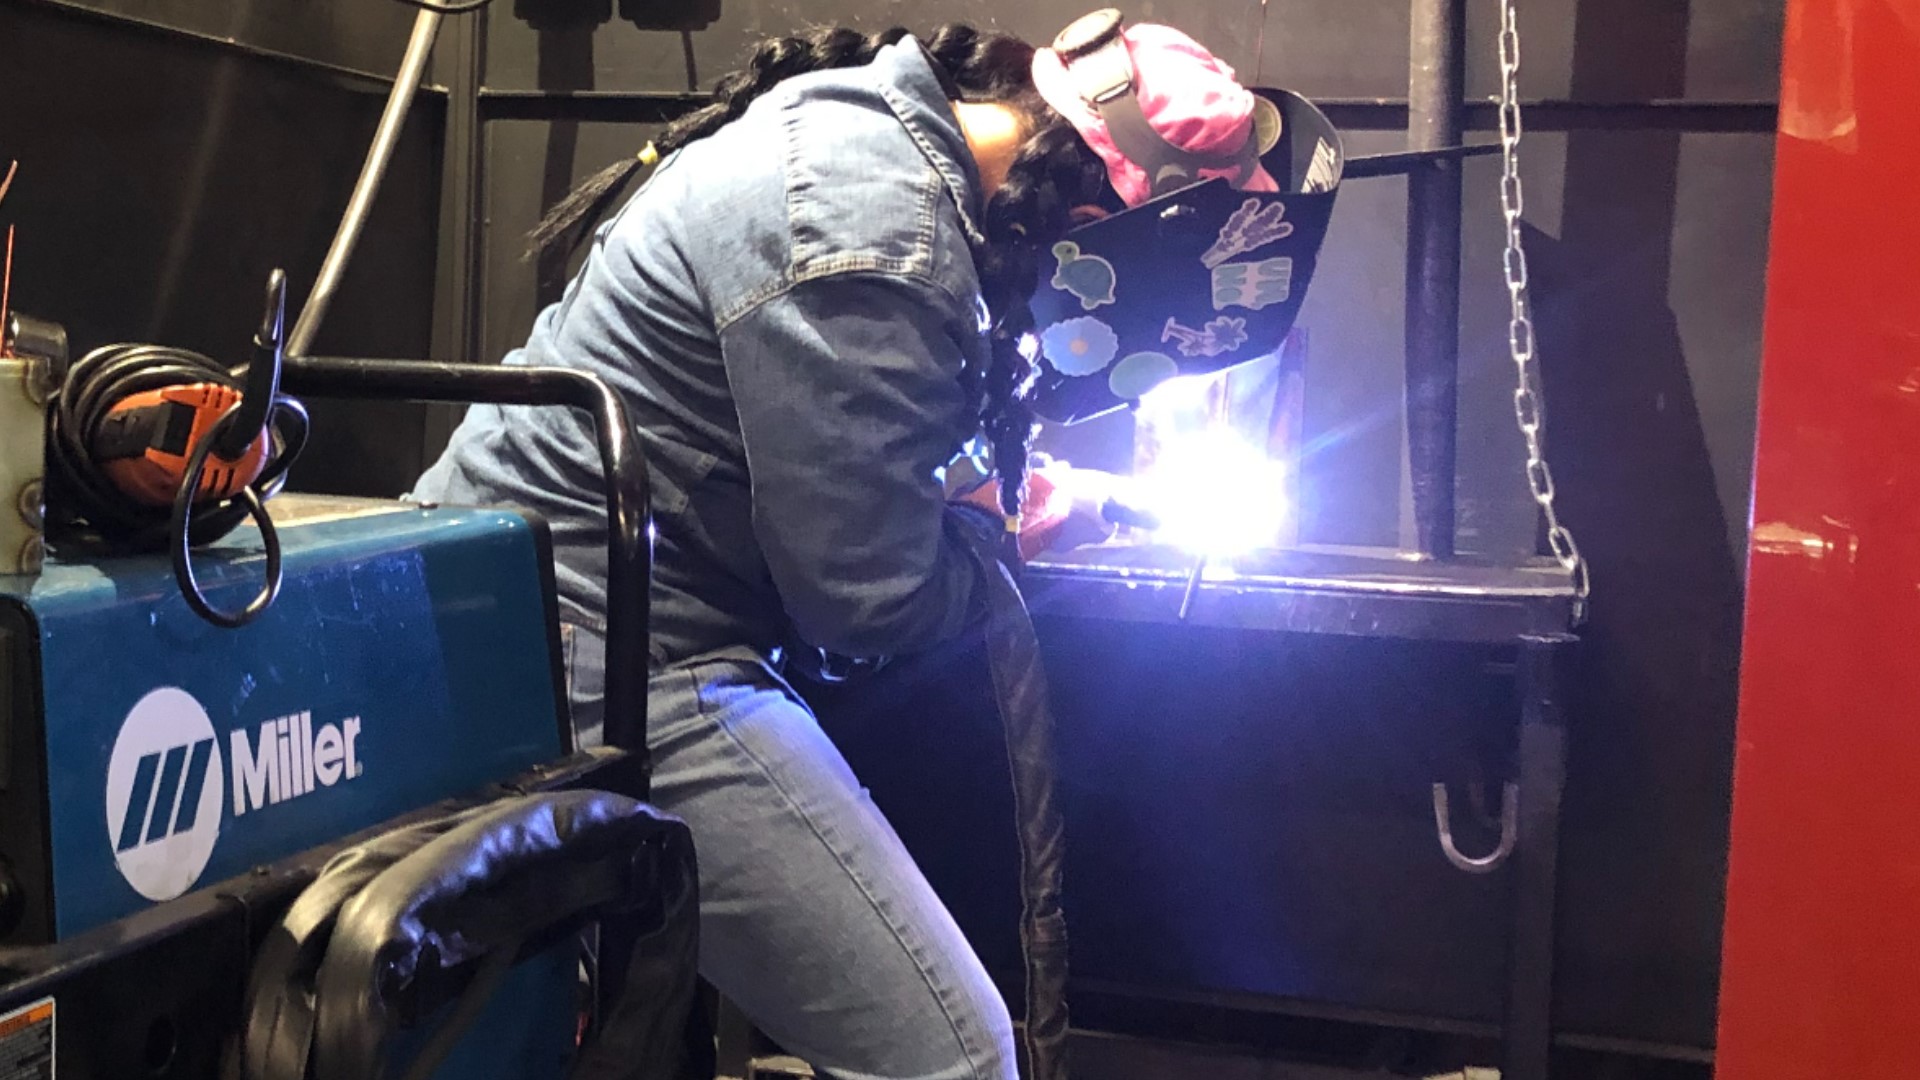 According to the American Welding Society, the United States will need more than 300,000 people to fill welding jobs in 2026.